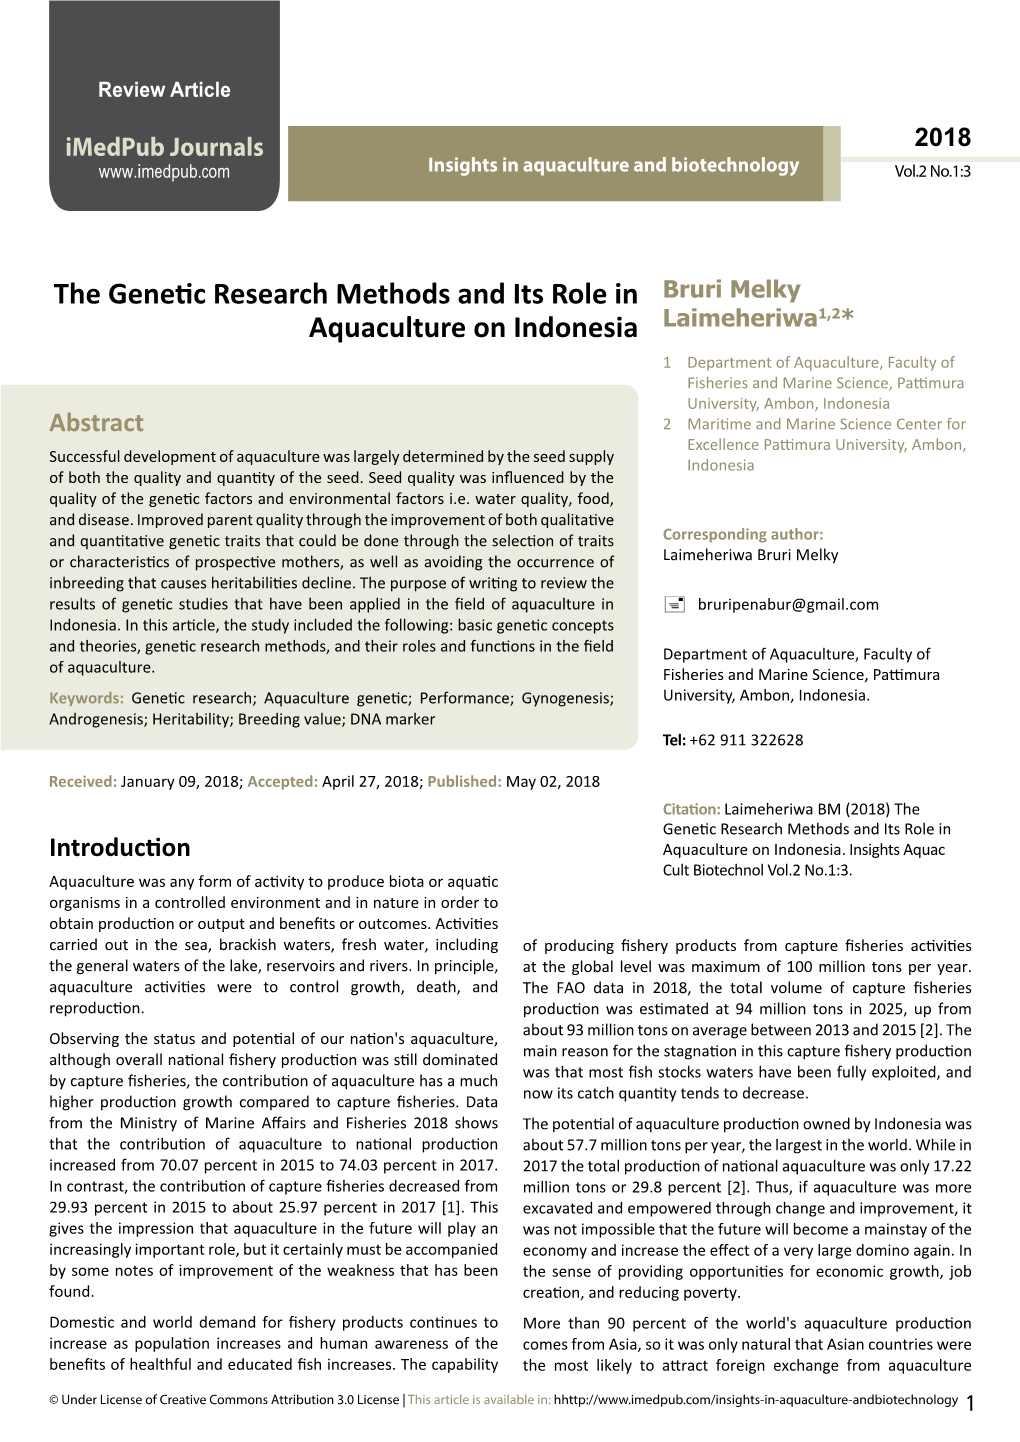 The Genetic Research Methods and Its Role in Aquaculture on Indonesia